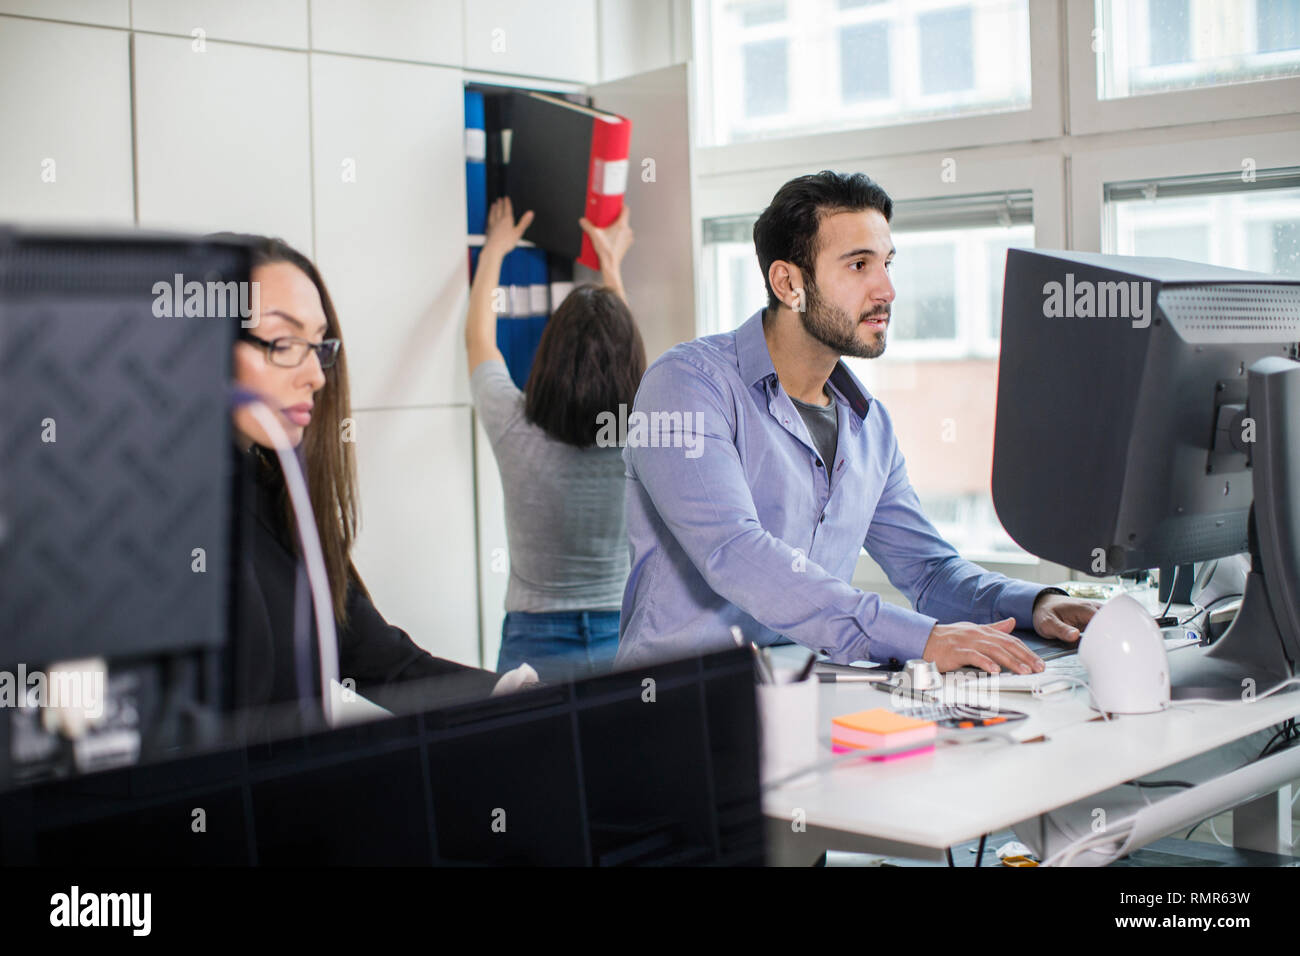 People working in office Banque D'Images